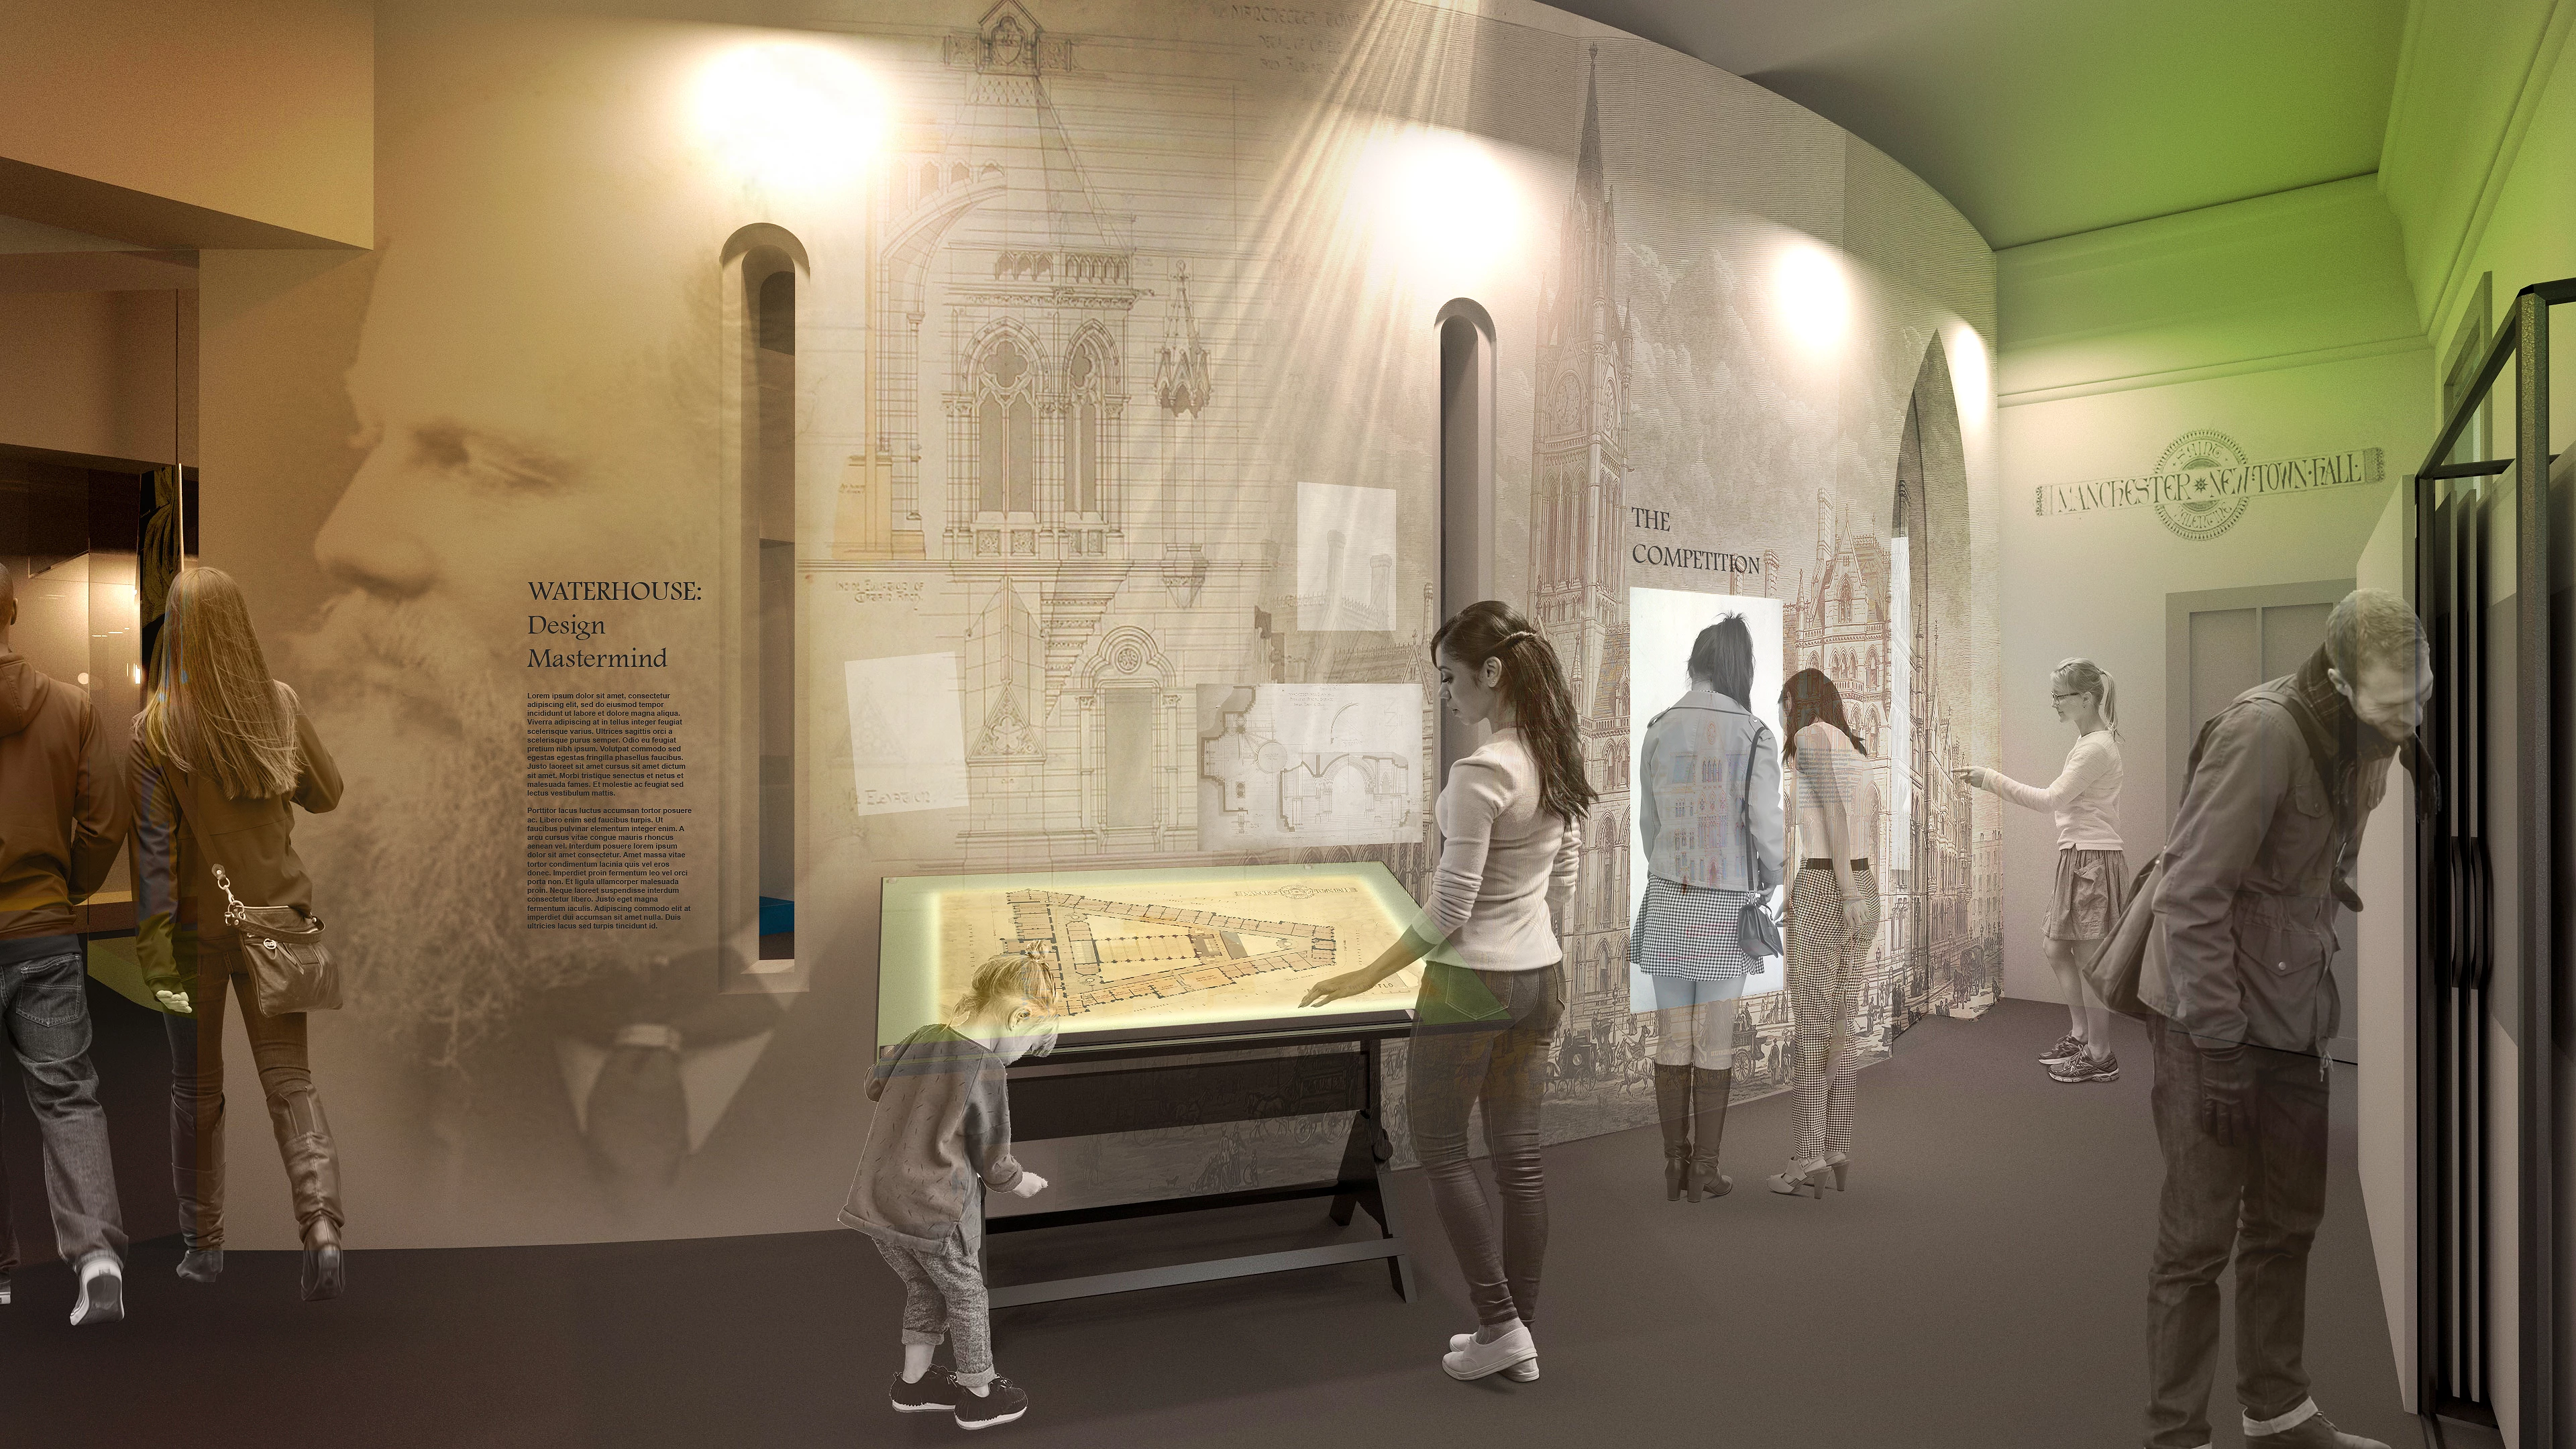 Mather & Co's visual envisioning how the exhibition may look